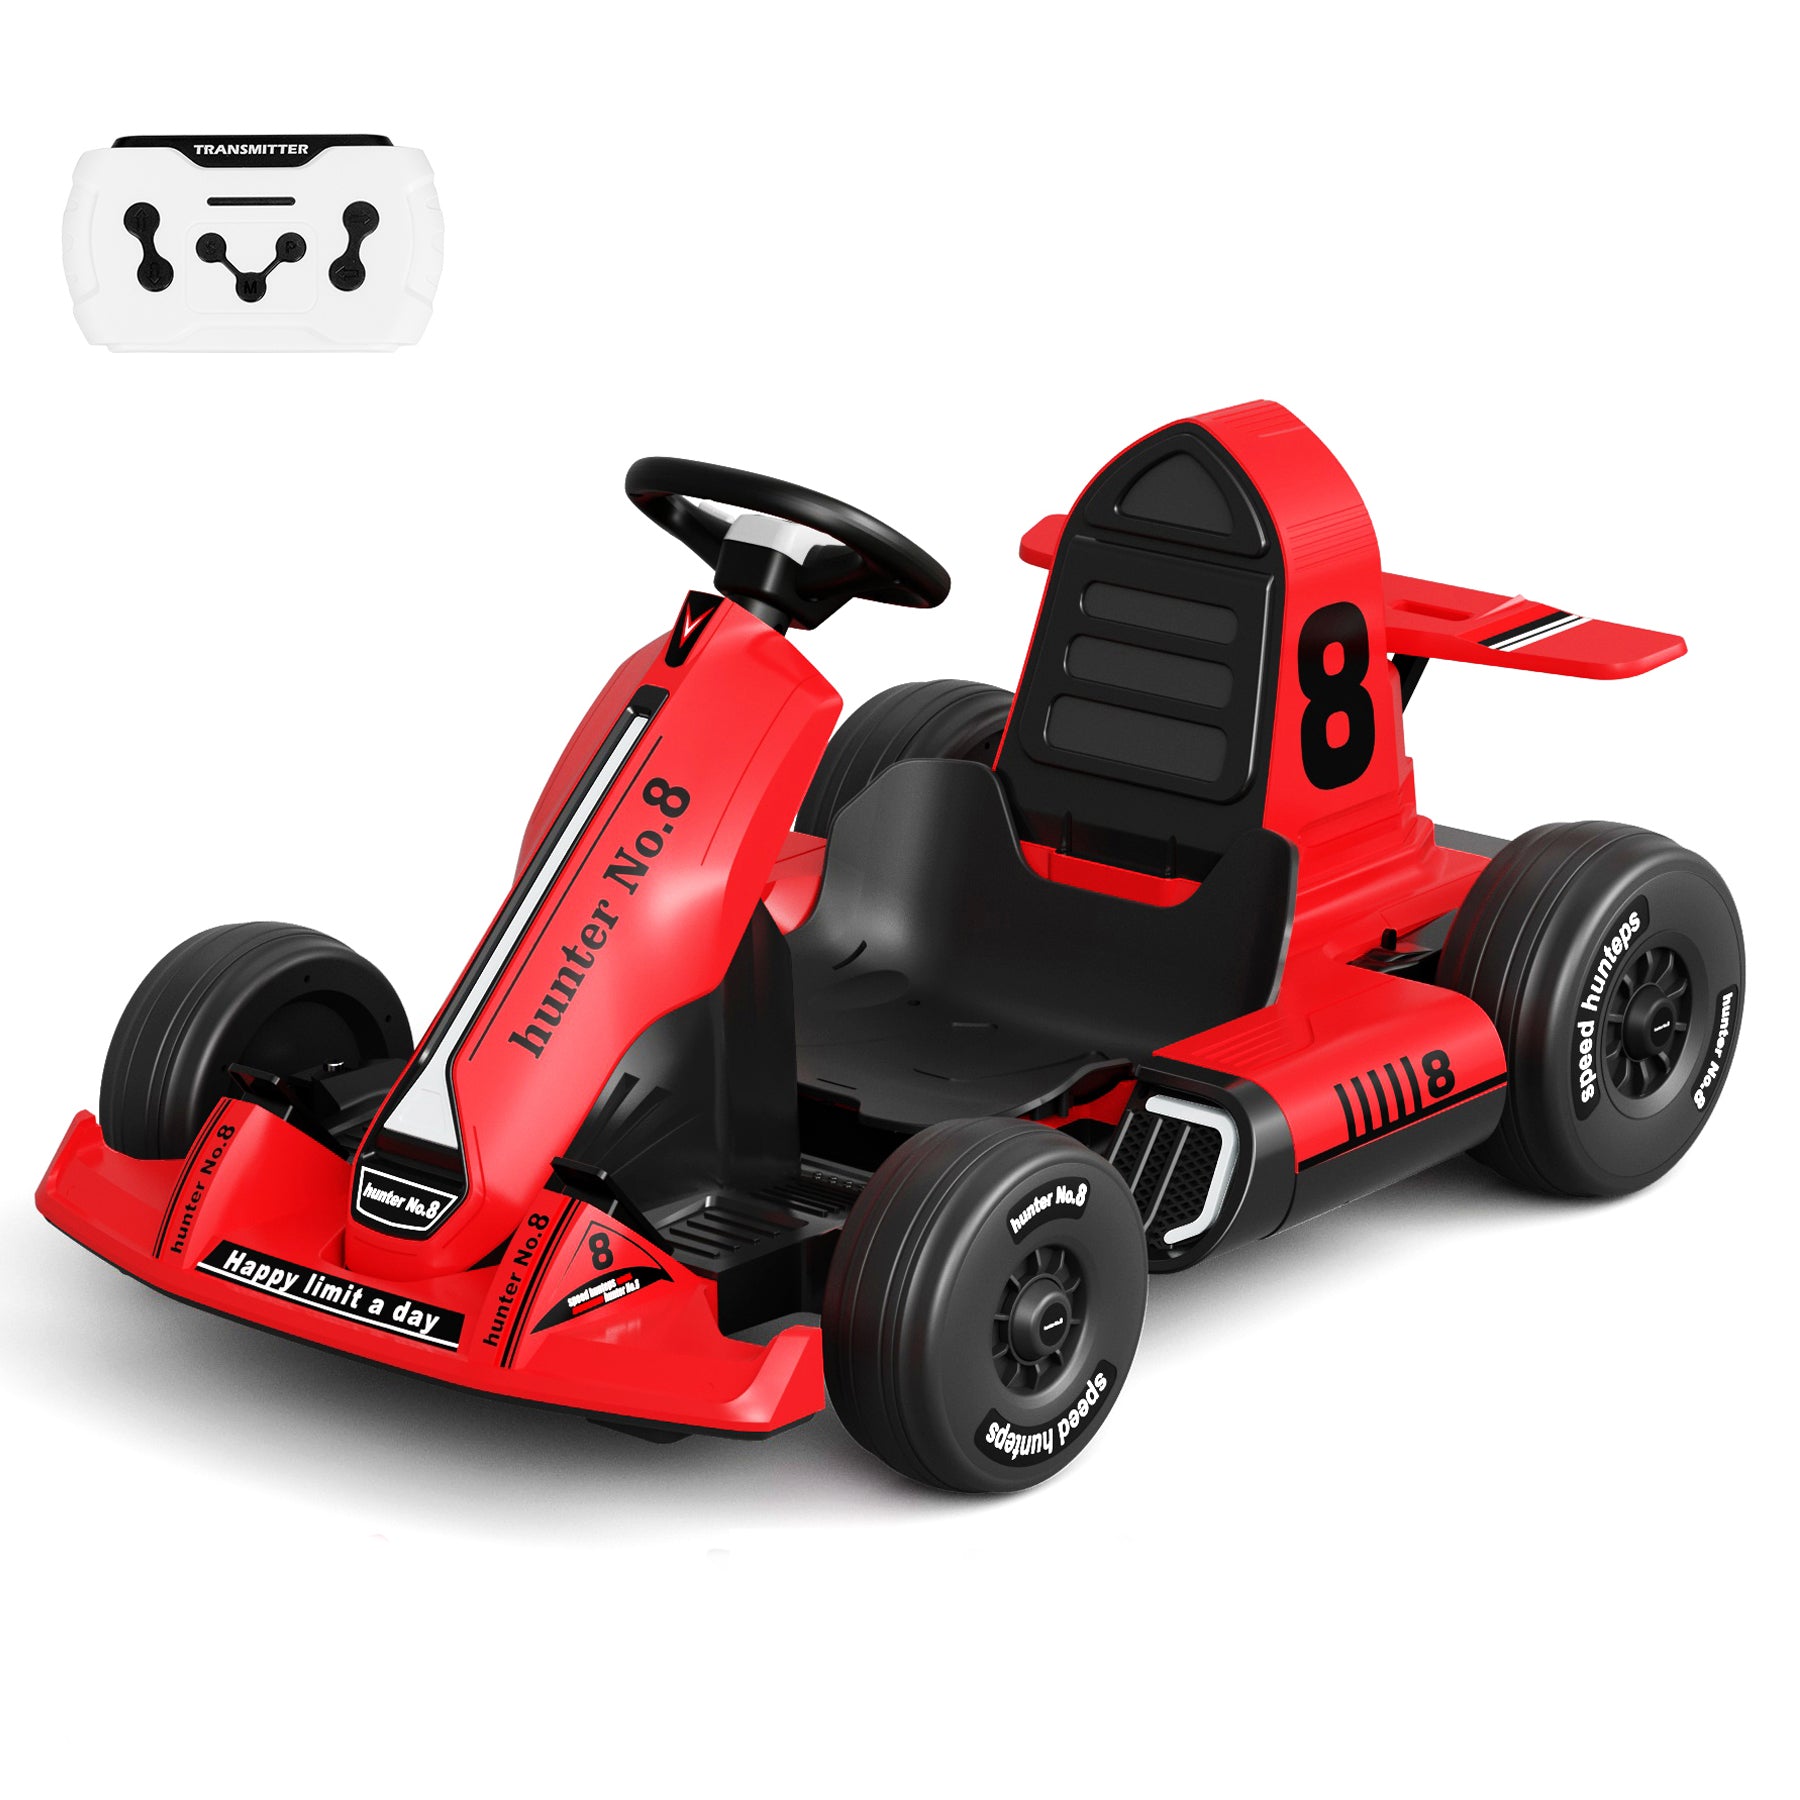 XJD Electric Go Kart for Kids Ages 3-8 12V Battery Powered Pedal